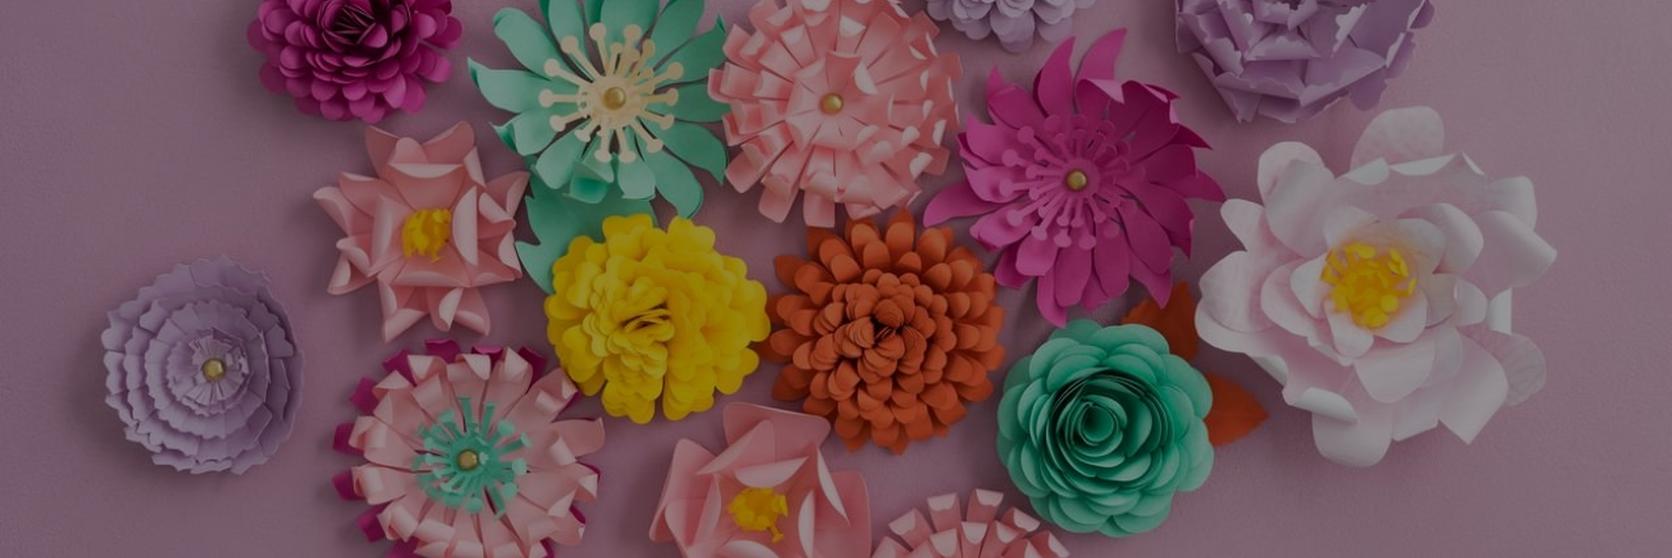 How You Can Make Unique Paper Flowers